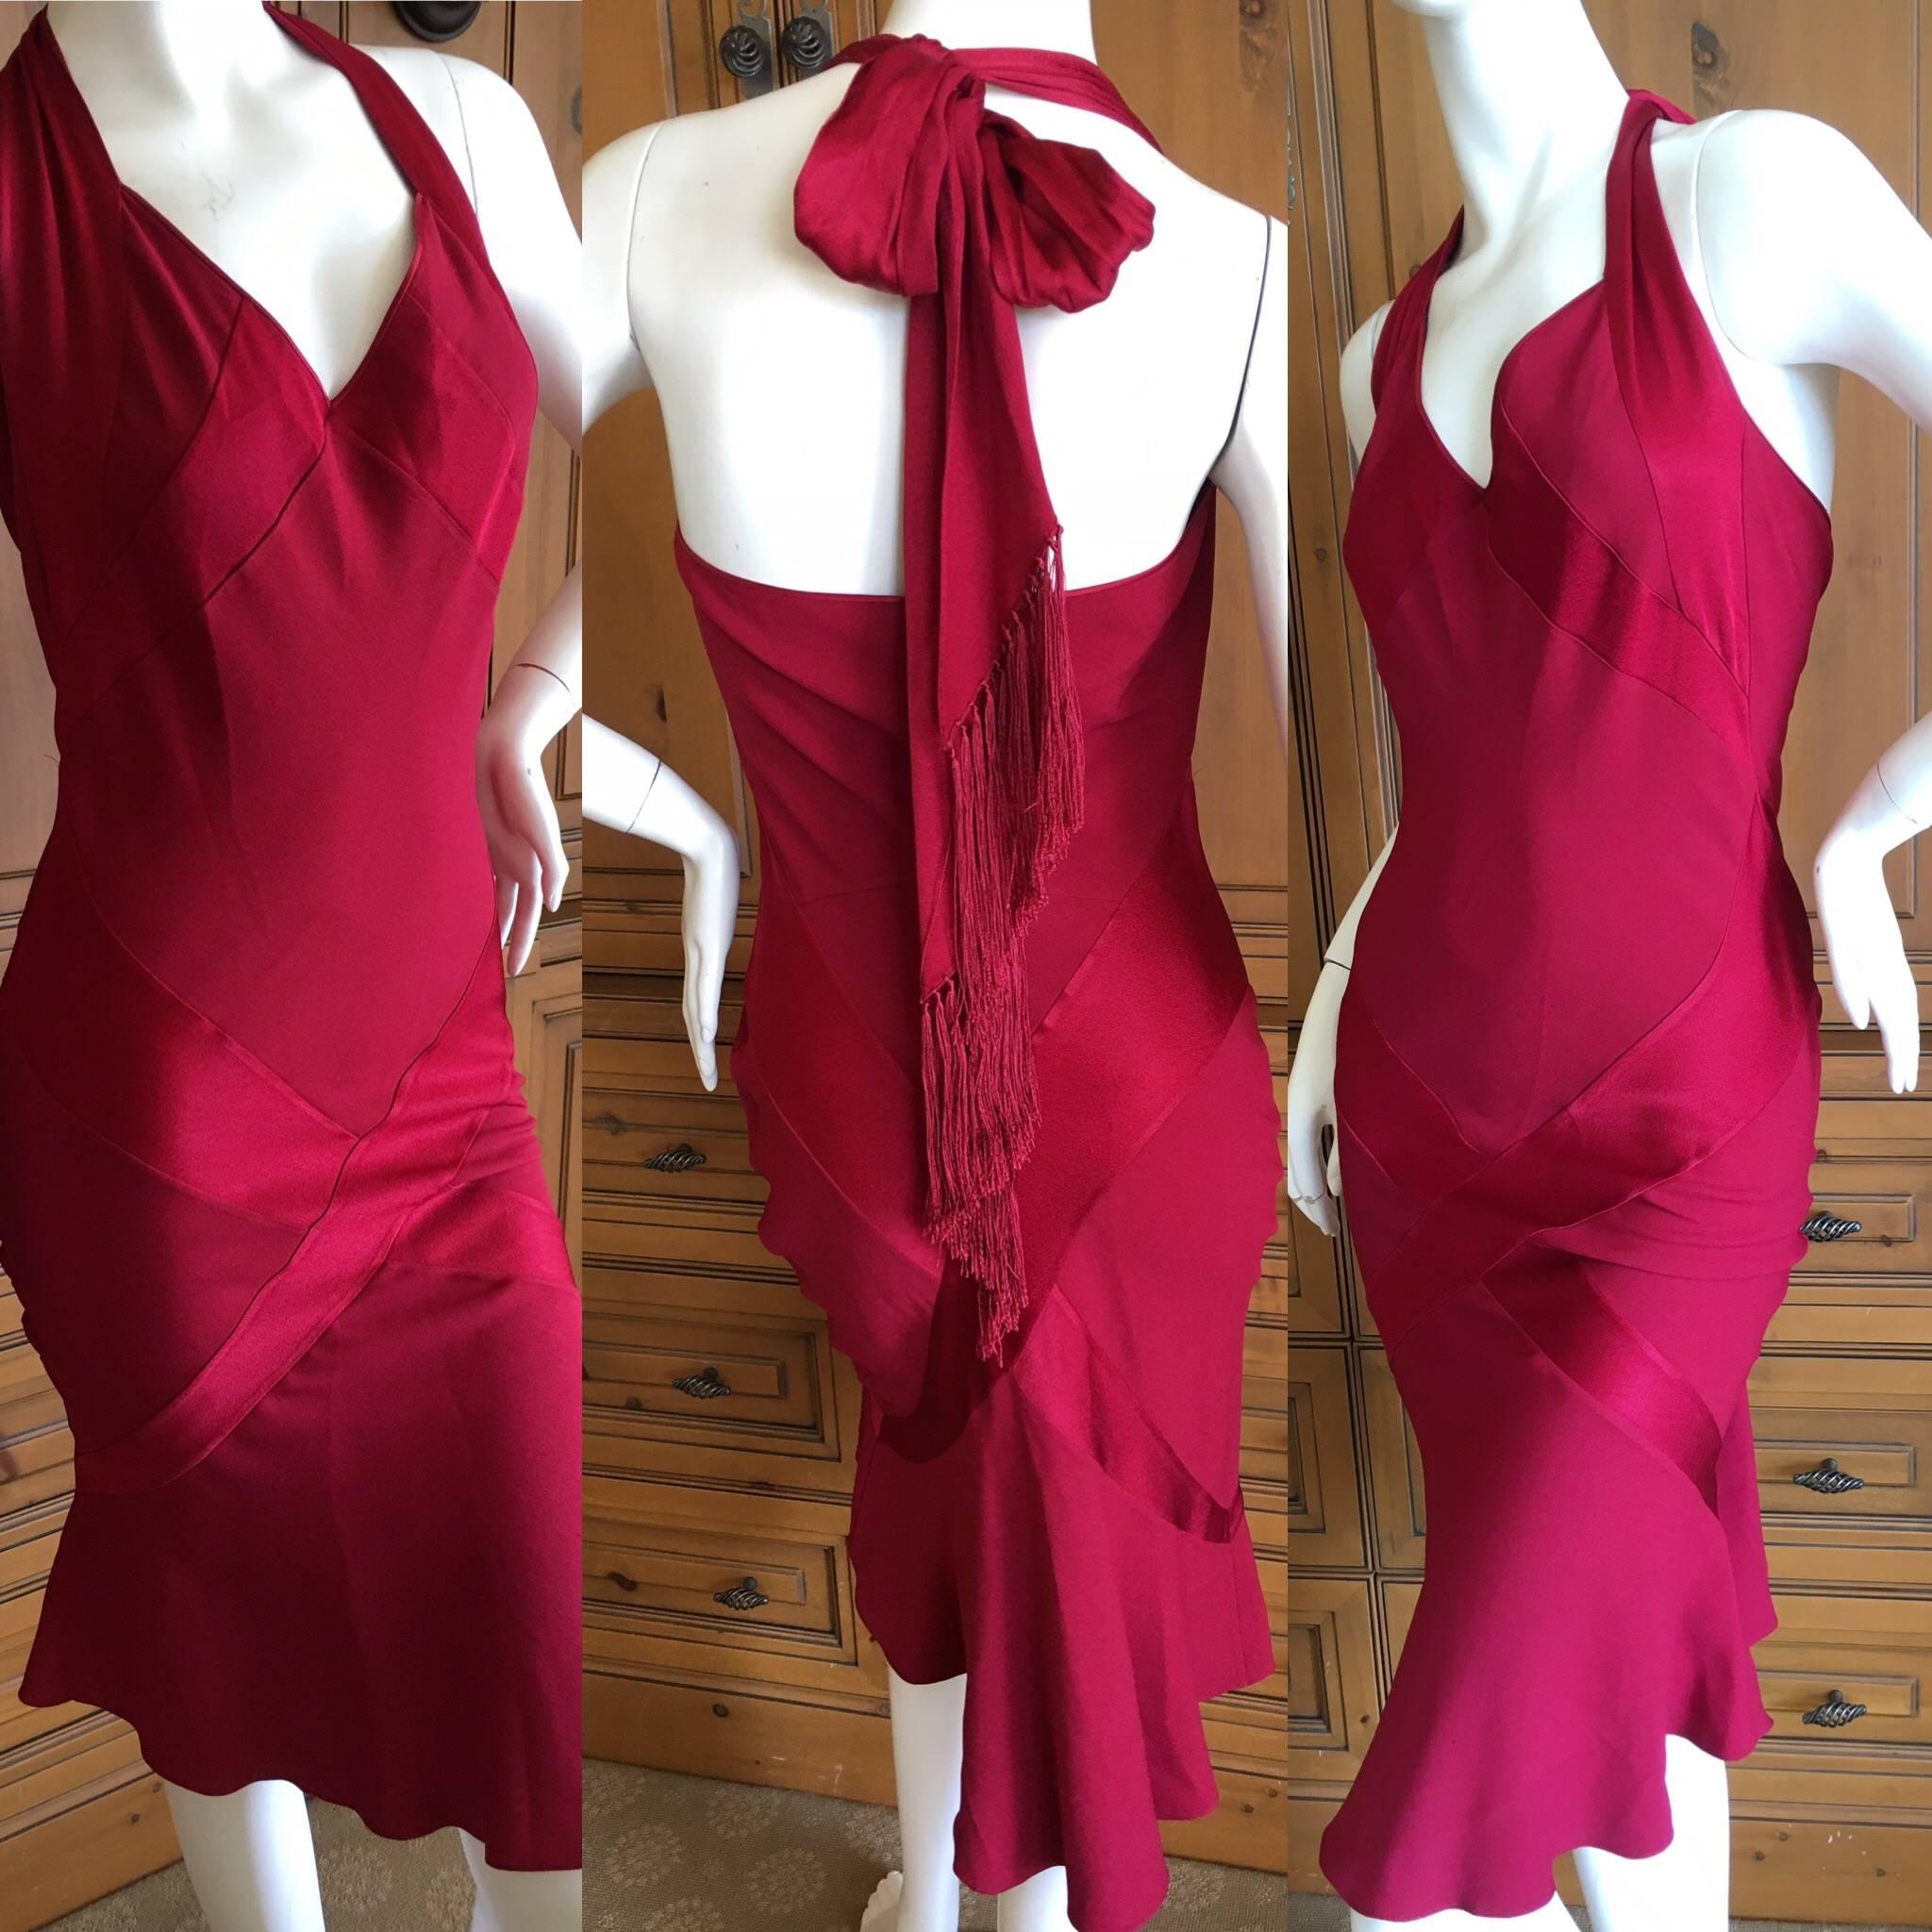 John Galliano Vintage Red Dress With Tassel Tie Back
Designed, as Galliano often did, using the front and the back of the fabric 
to show contrasting patterns in the dress.
 Size 40
 Bust 36